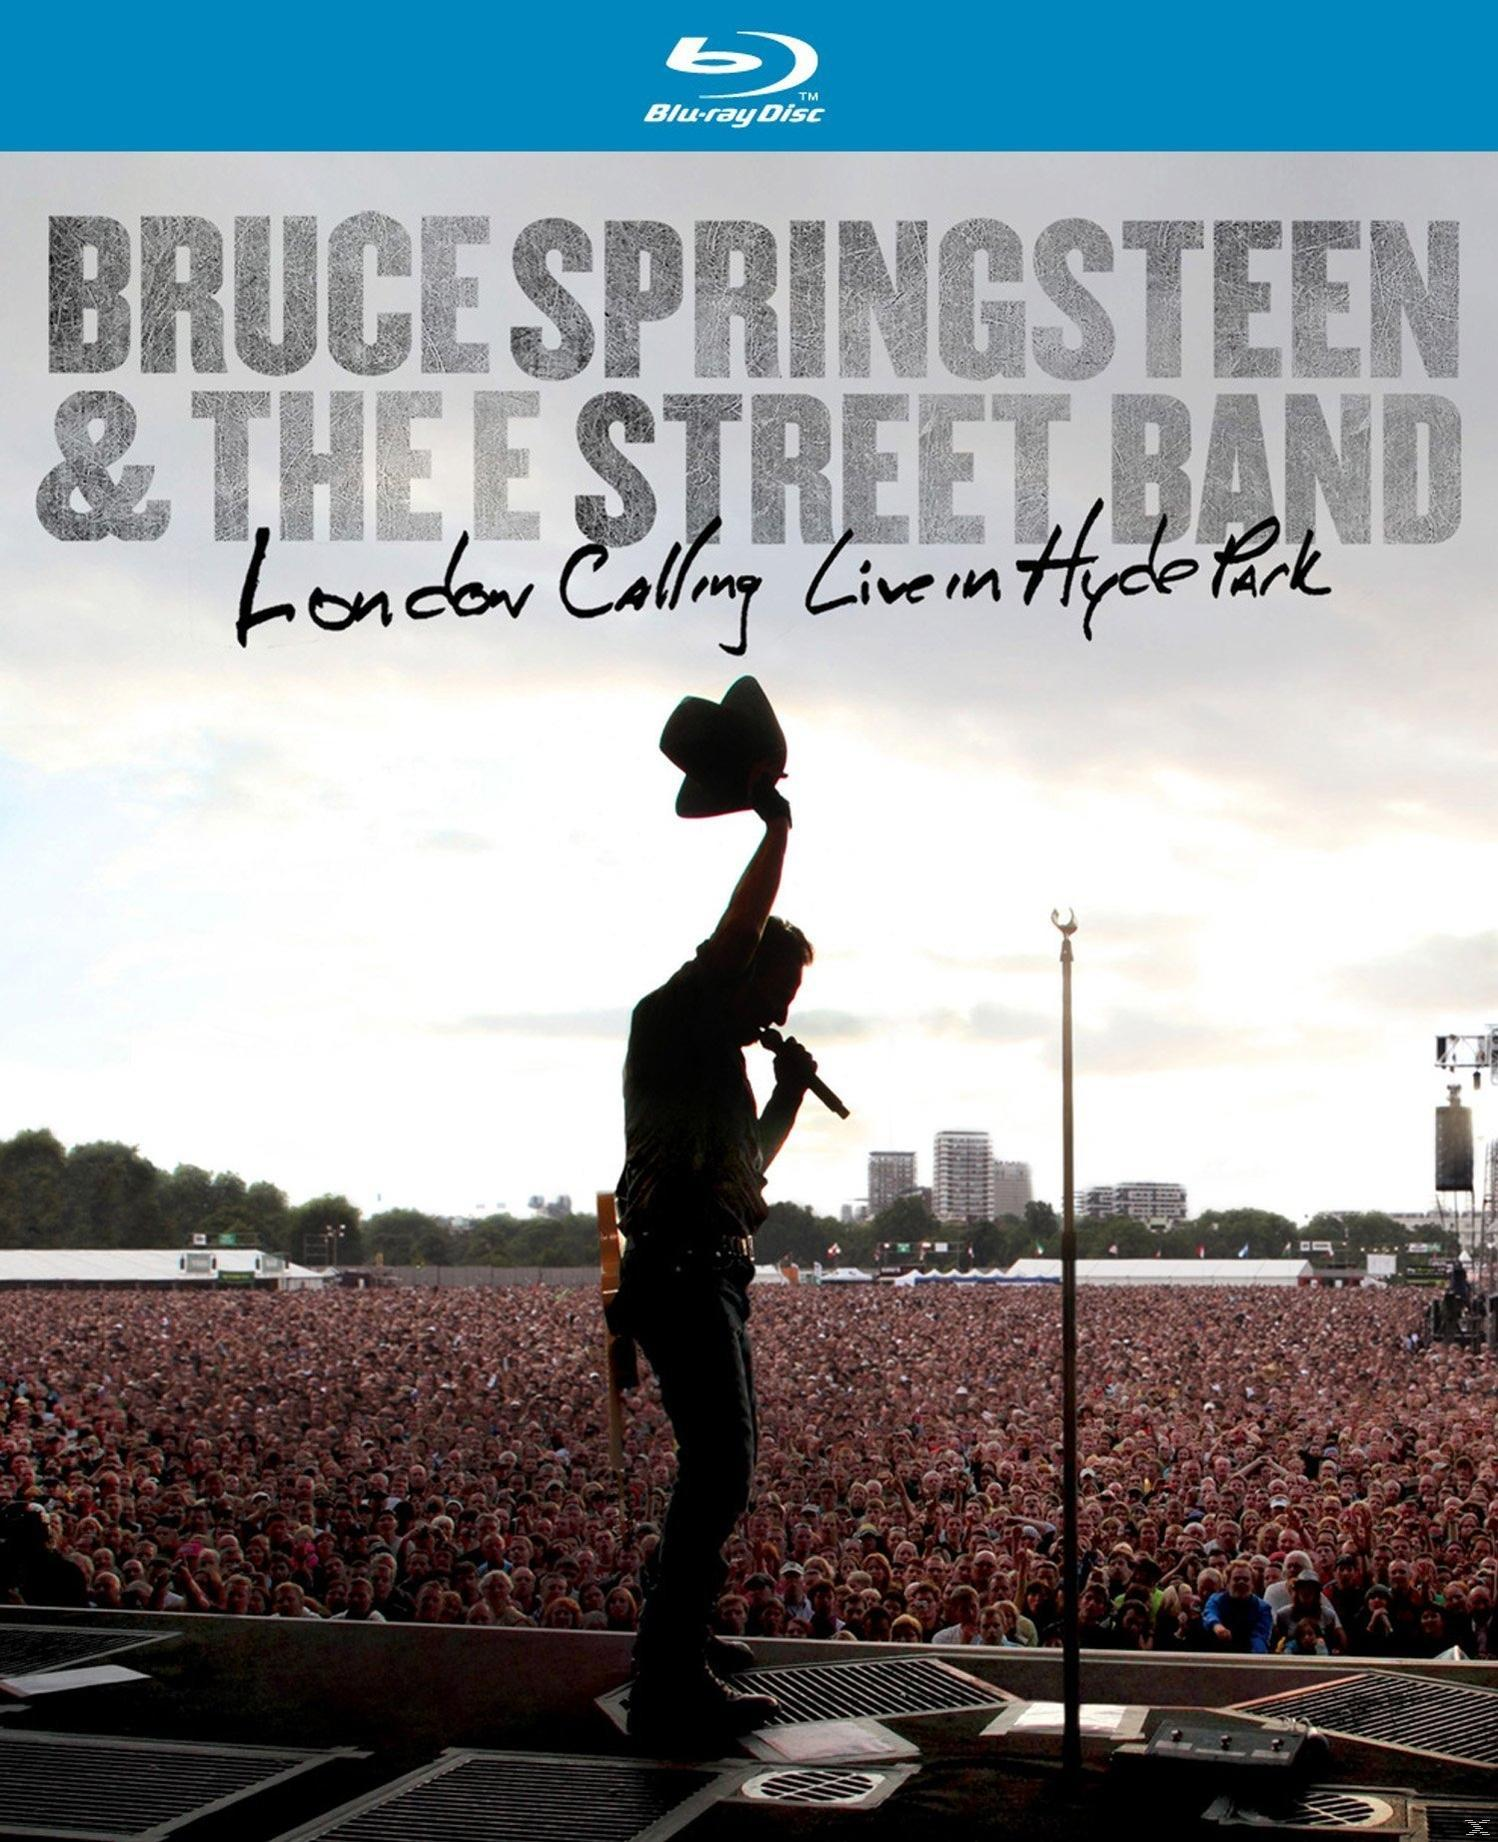 The Bruce Hyde London E (Blu-ray) Live Street Band Street In Band - Springsteen, Park E - - Calling -